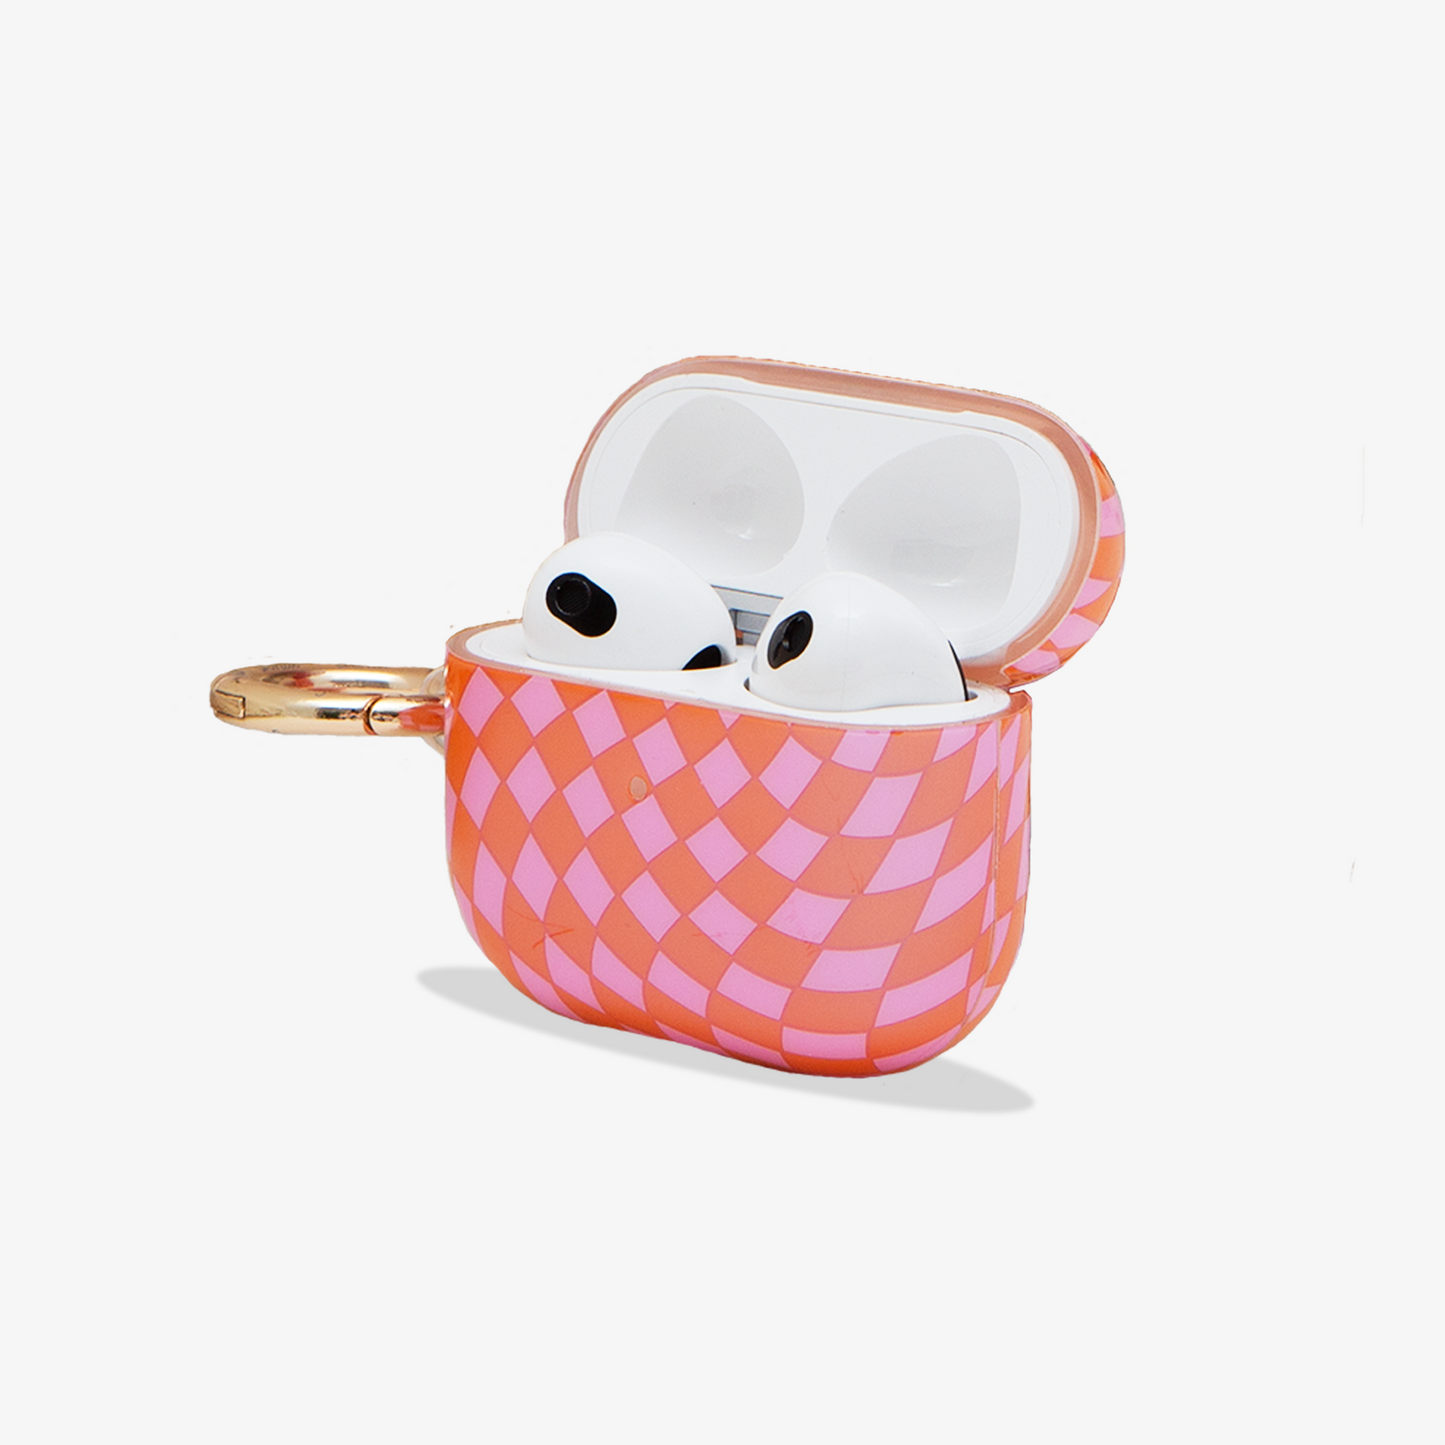 Checkmate Pink/Orange AirPods Case